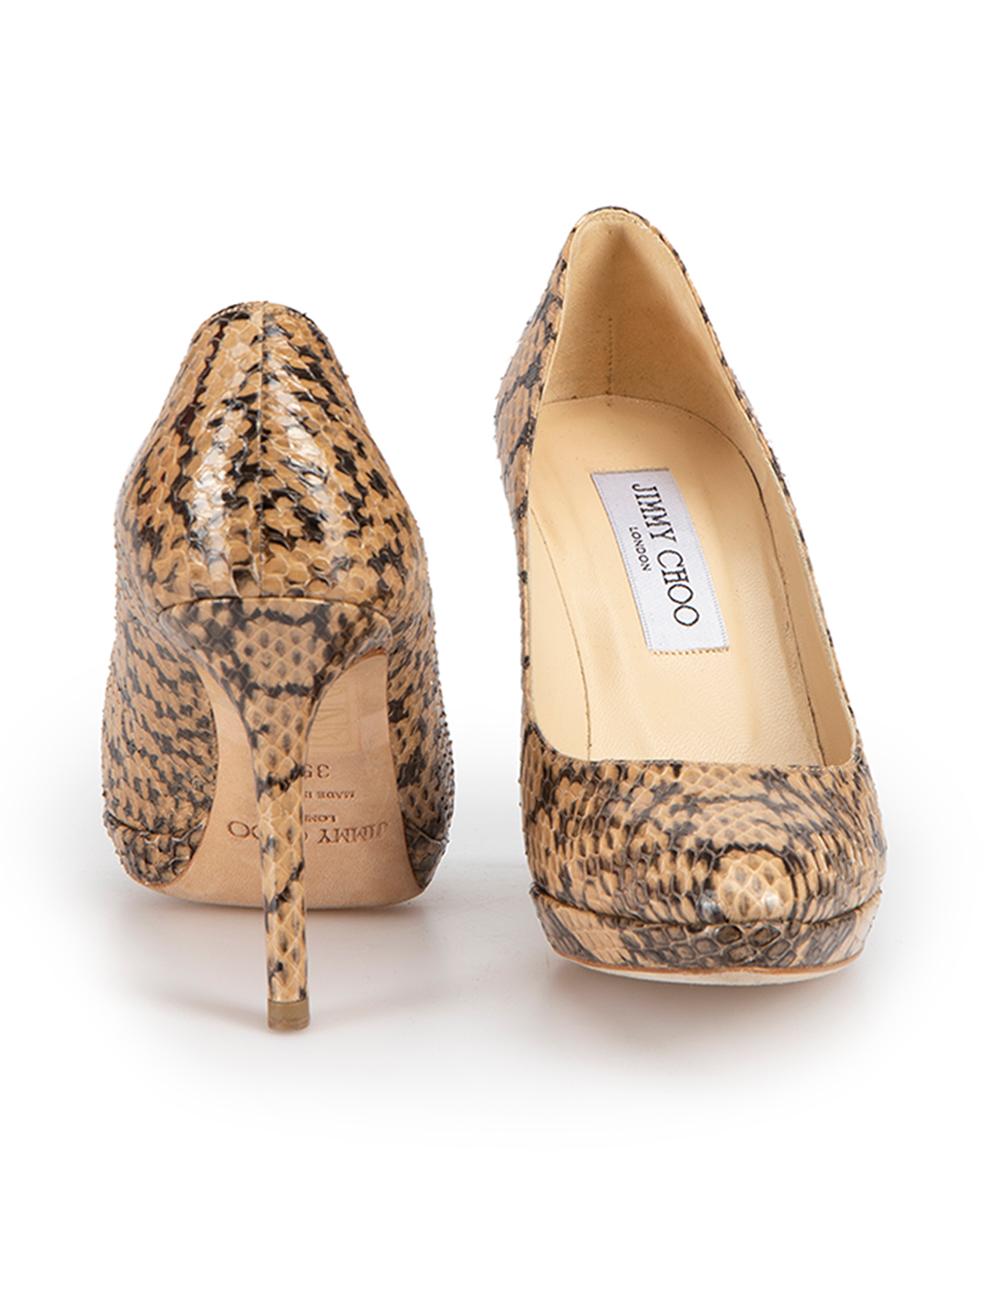 Beige & Black Snakeskin Leather Pumps Size IT 35.5 In Good Condition For Sale In London, GB